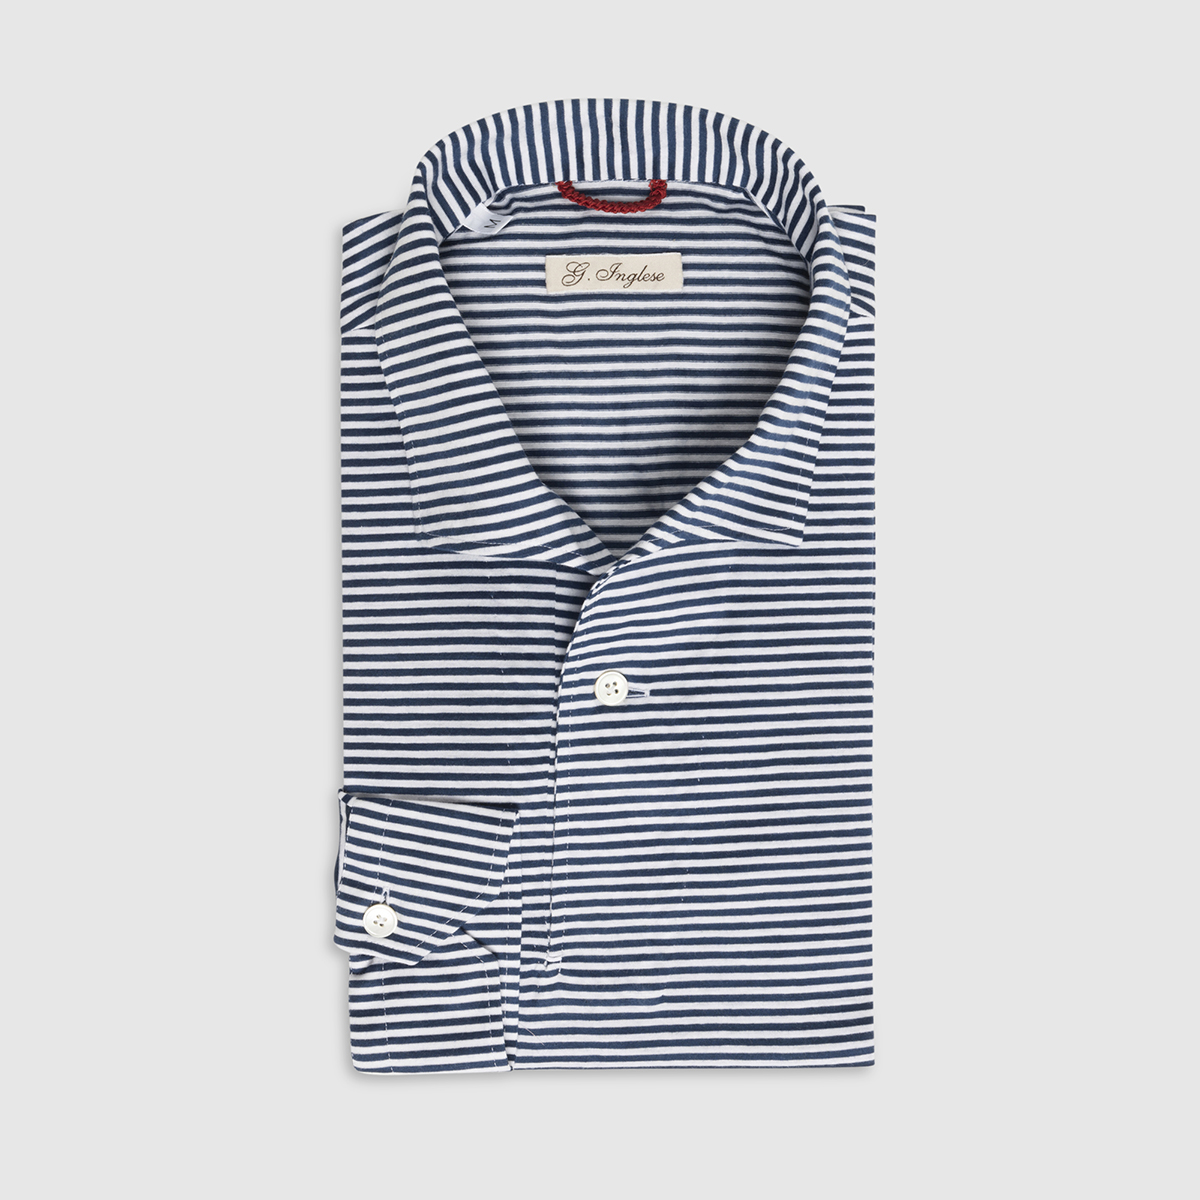 Striped Cotton Jersey Polo Shirt G. Inglese on sale 2022